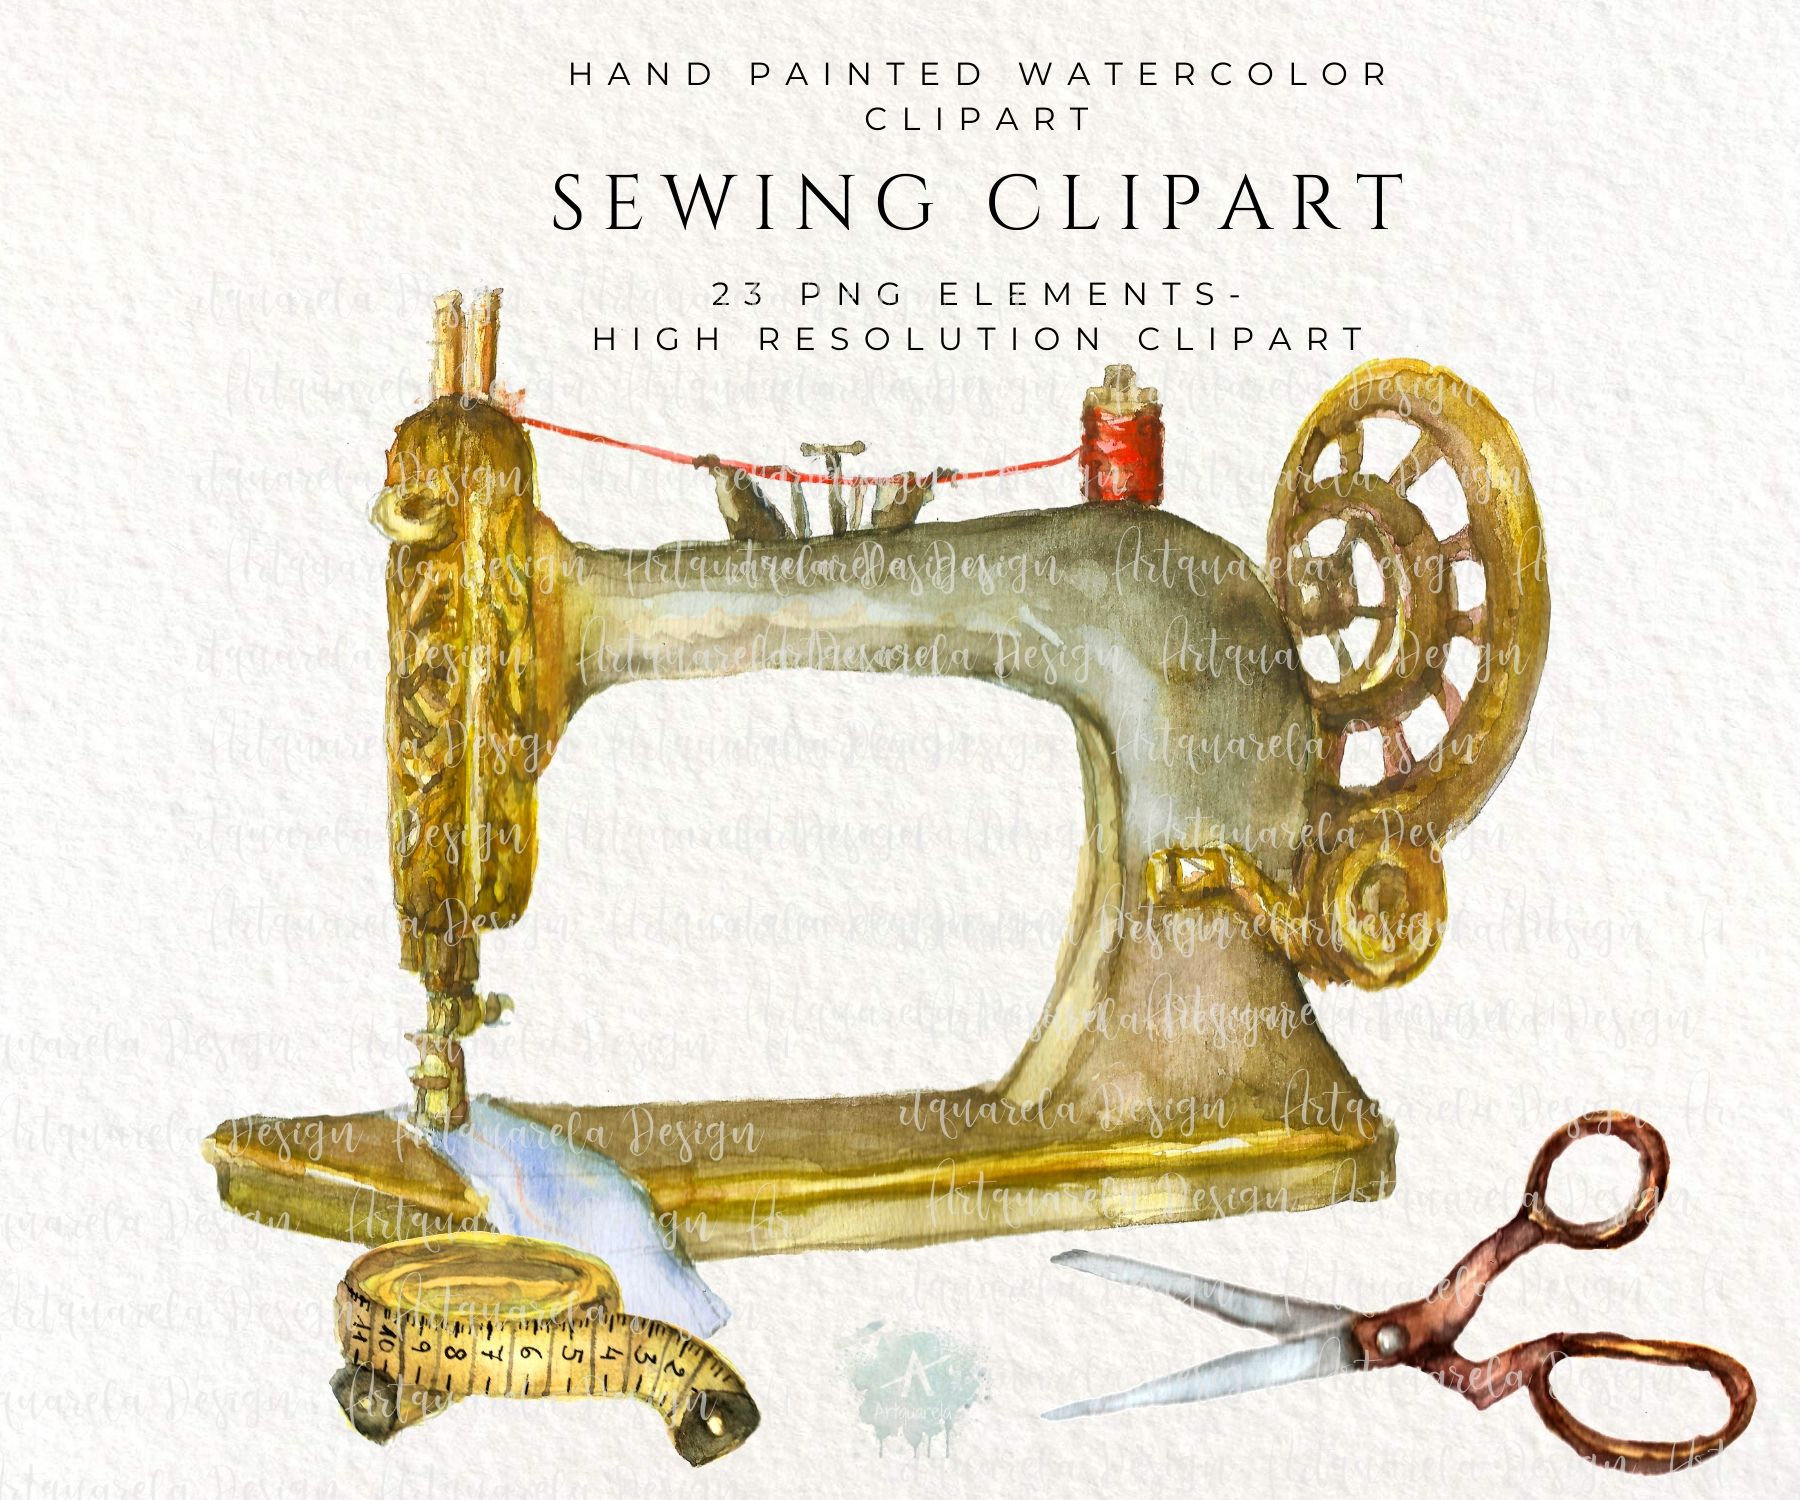 Watercolor Vintage Sewing Kit Clip Art. Branding Kit, Sewing Machine,  Needle, Stitching, Scissors, Dummy Model DIY Clipart. 